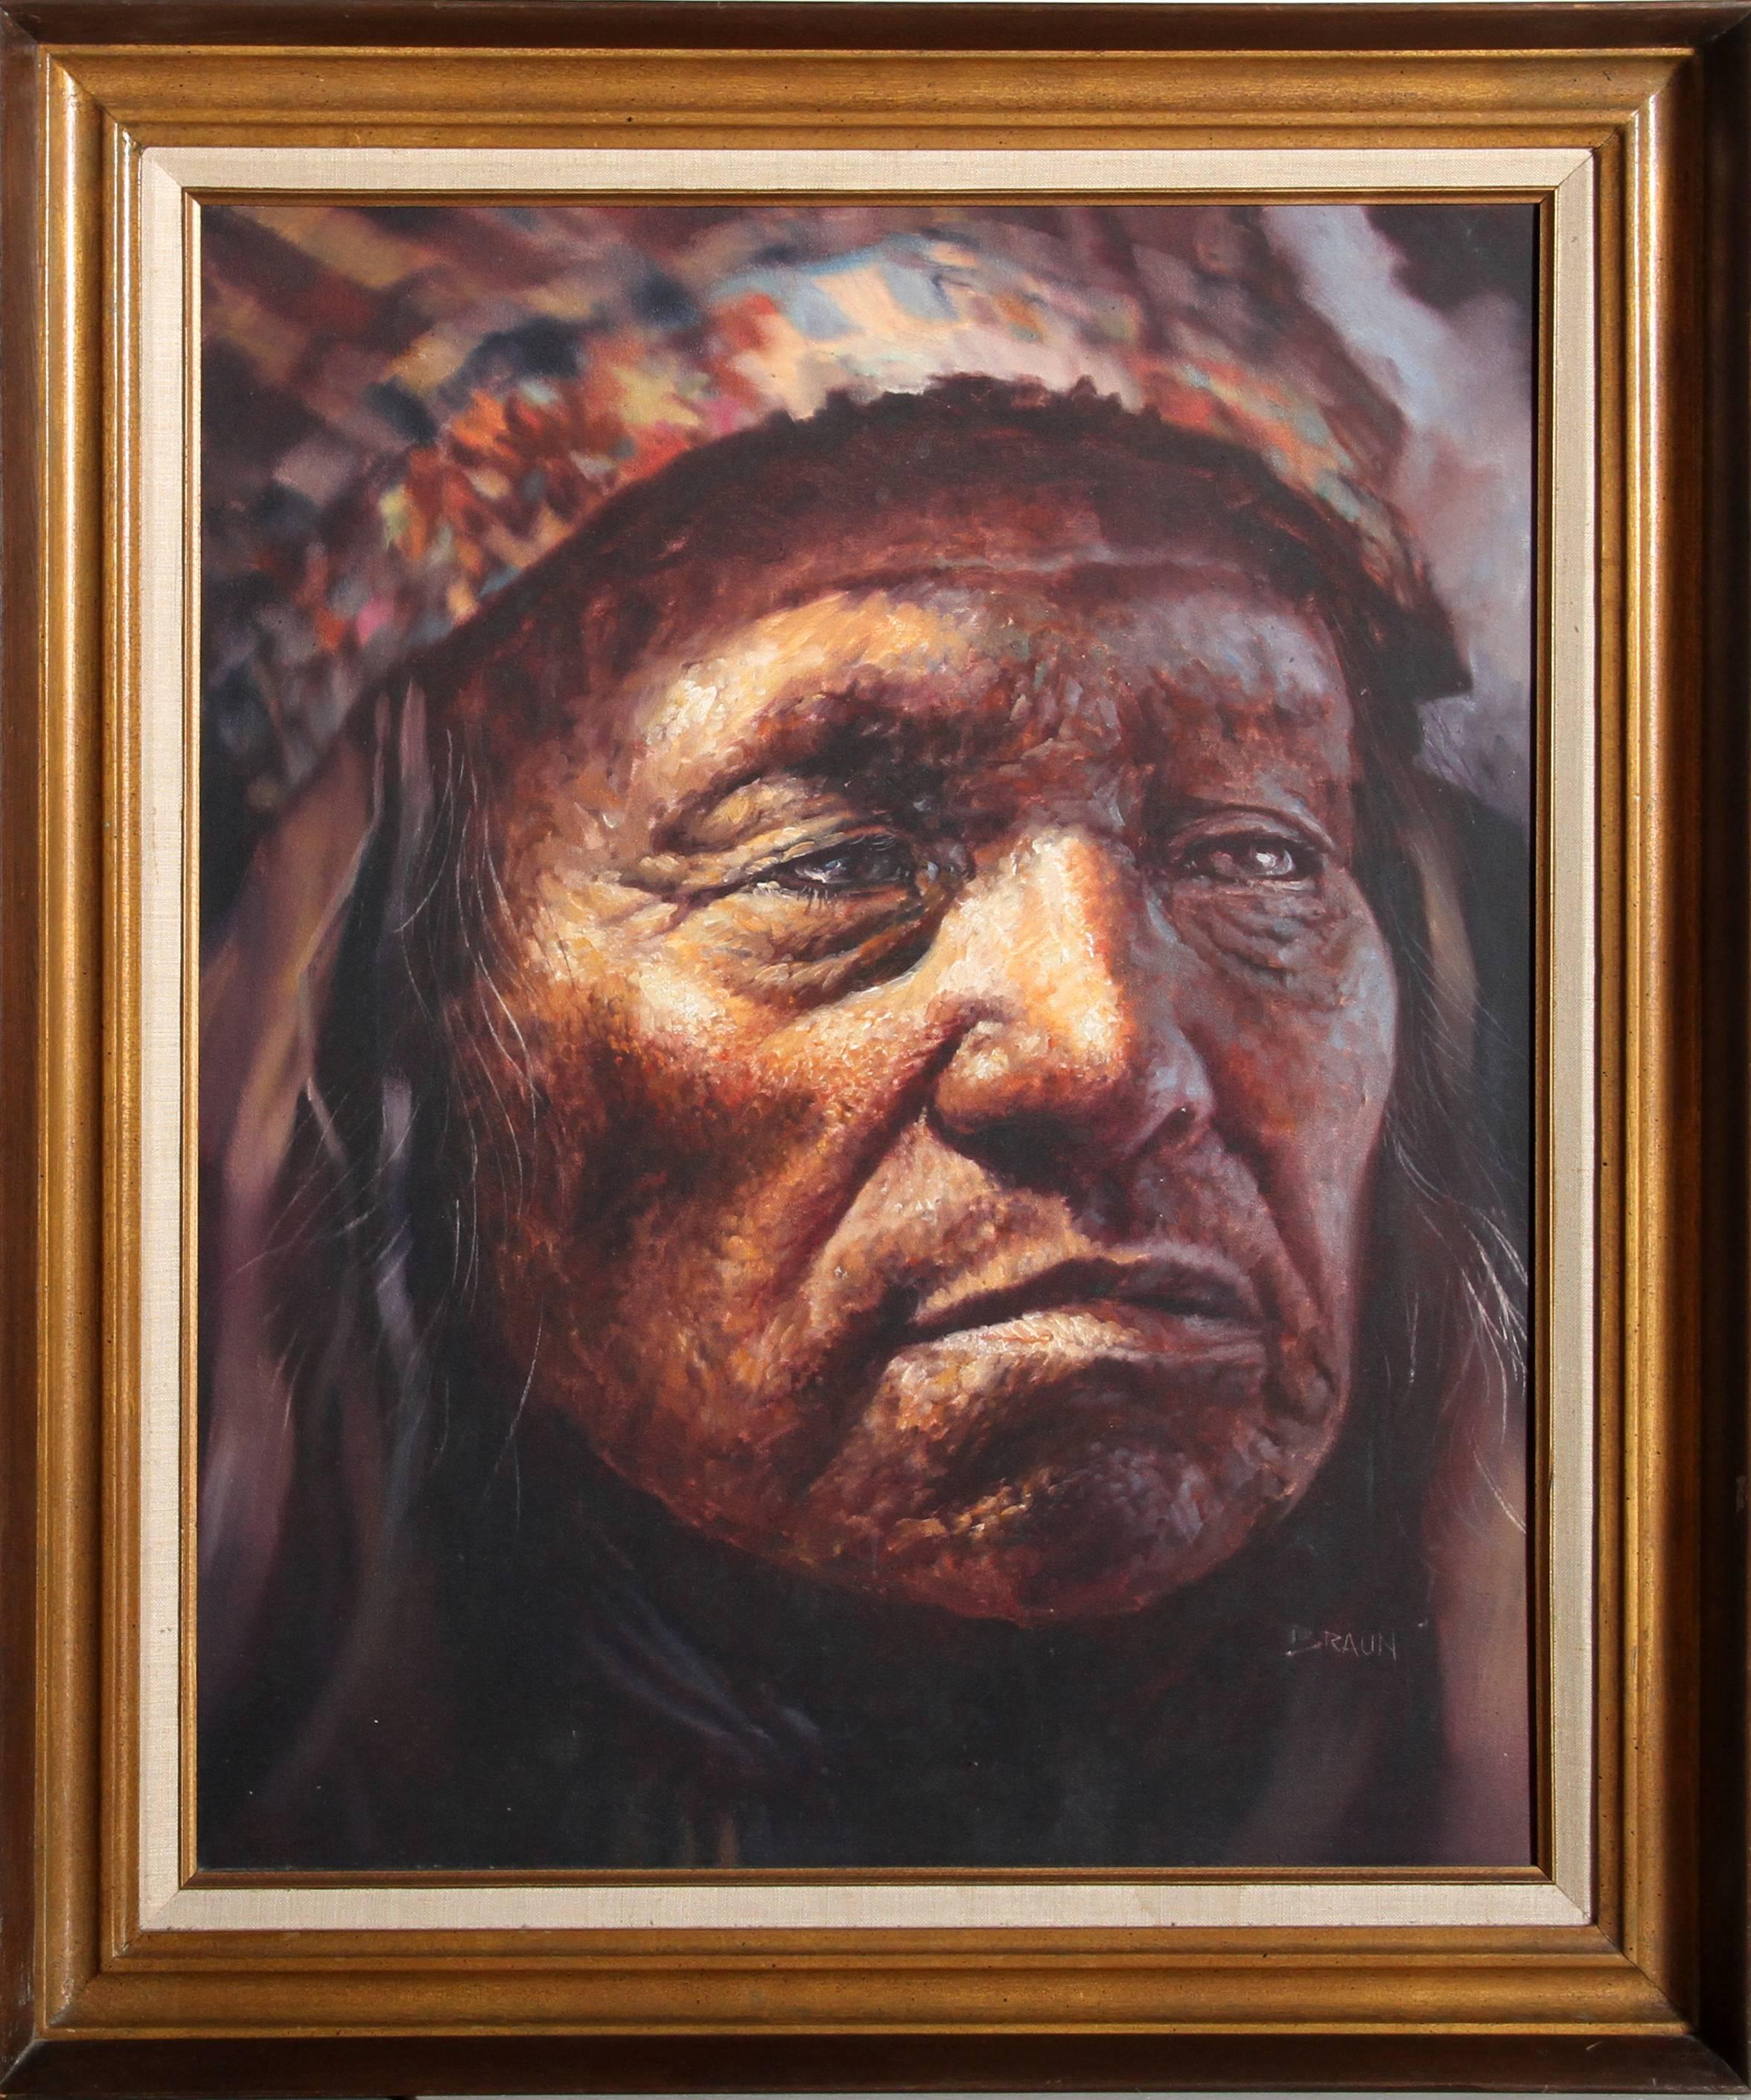 American Indian Chief Portrait, Oil Painting on Canvas by Jorge Braun Tarallo